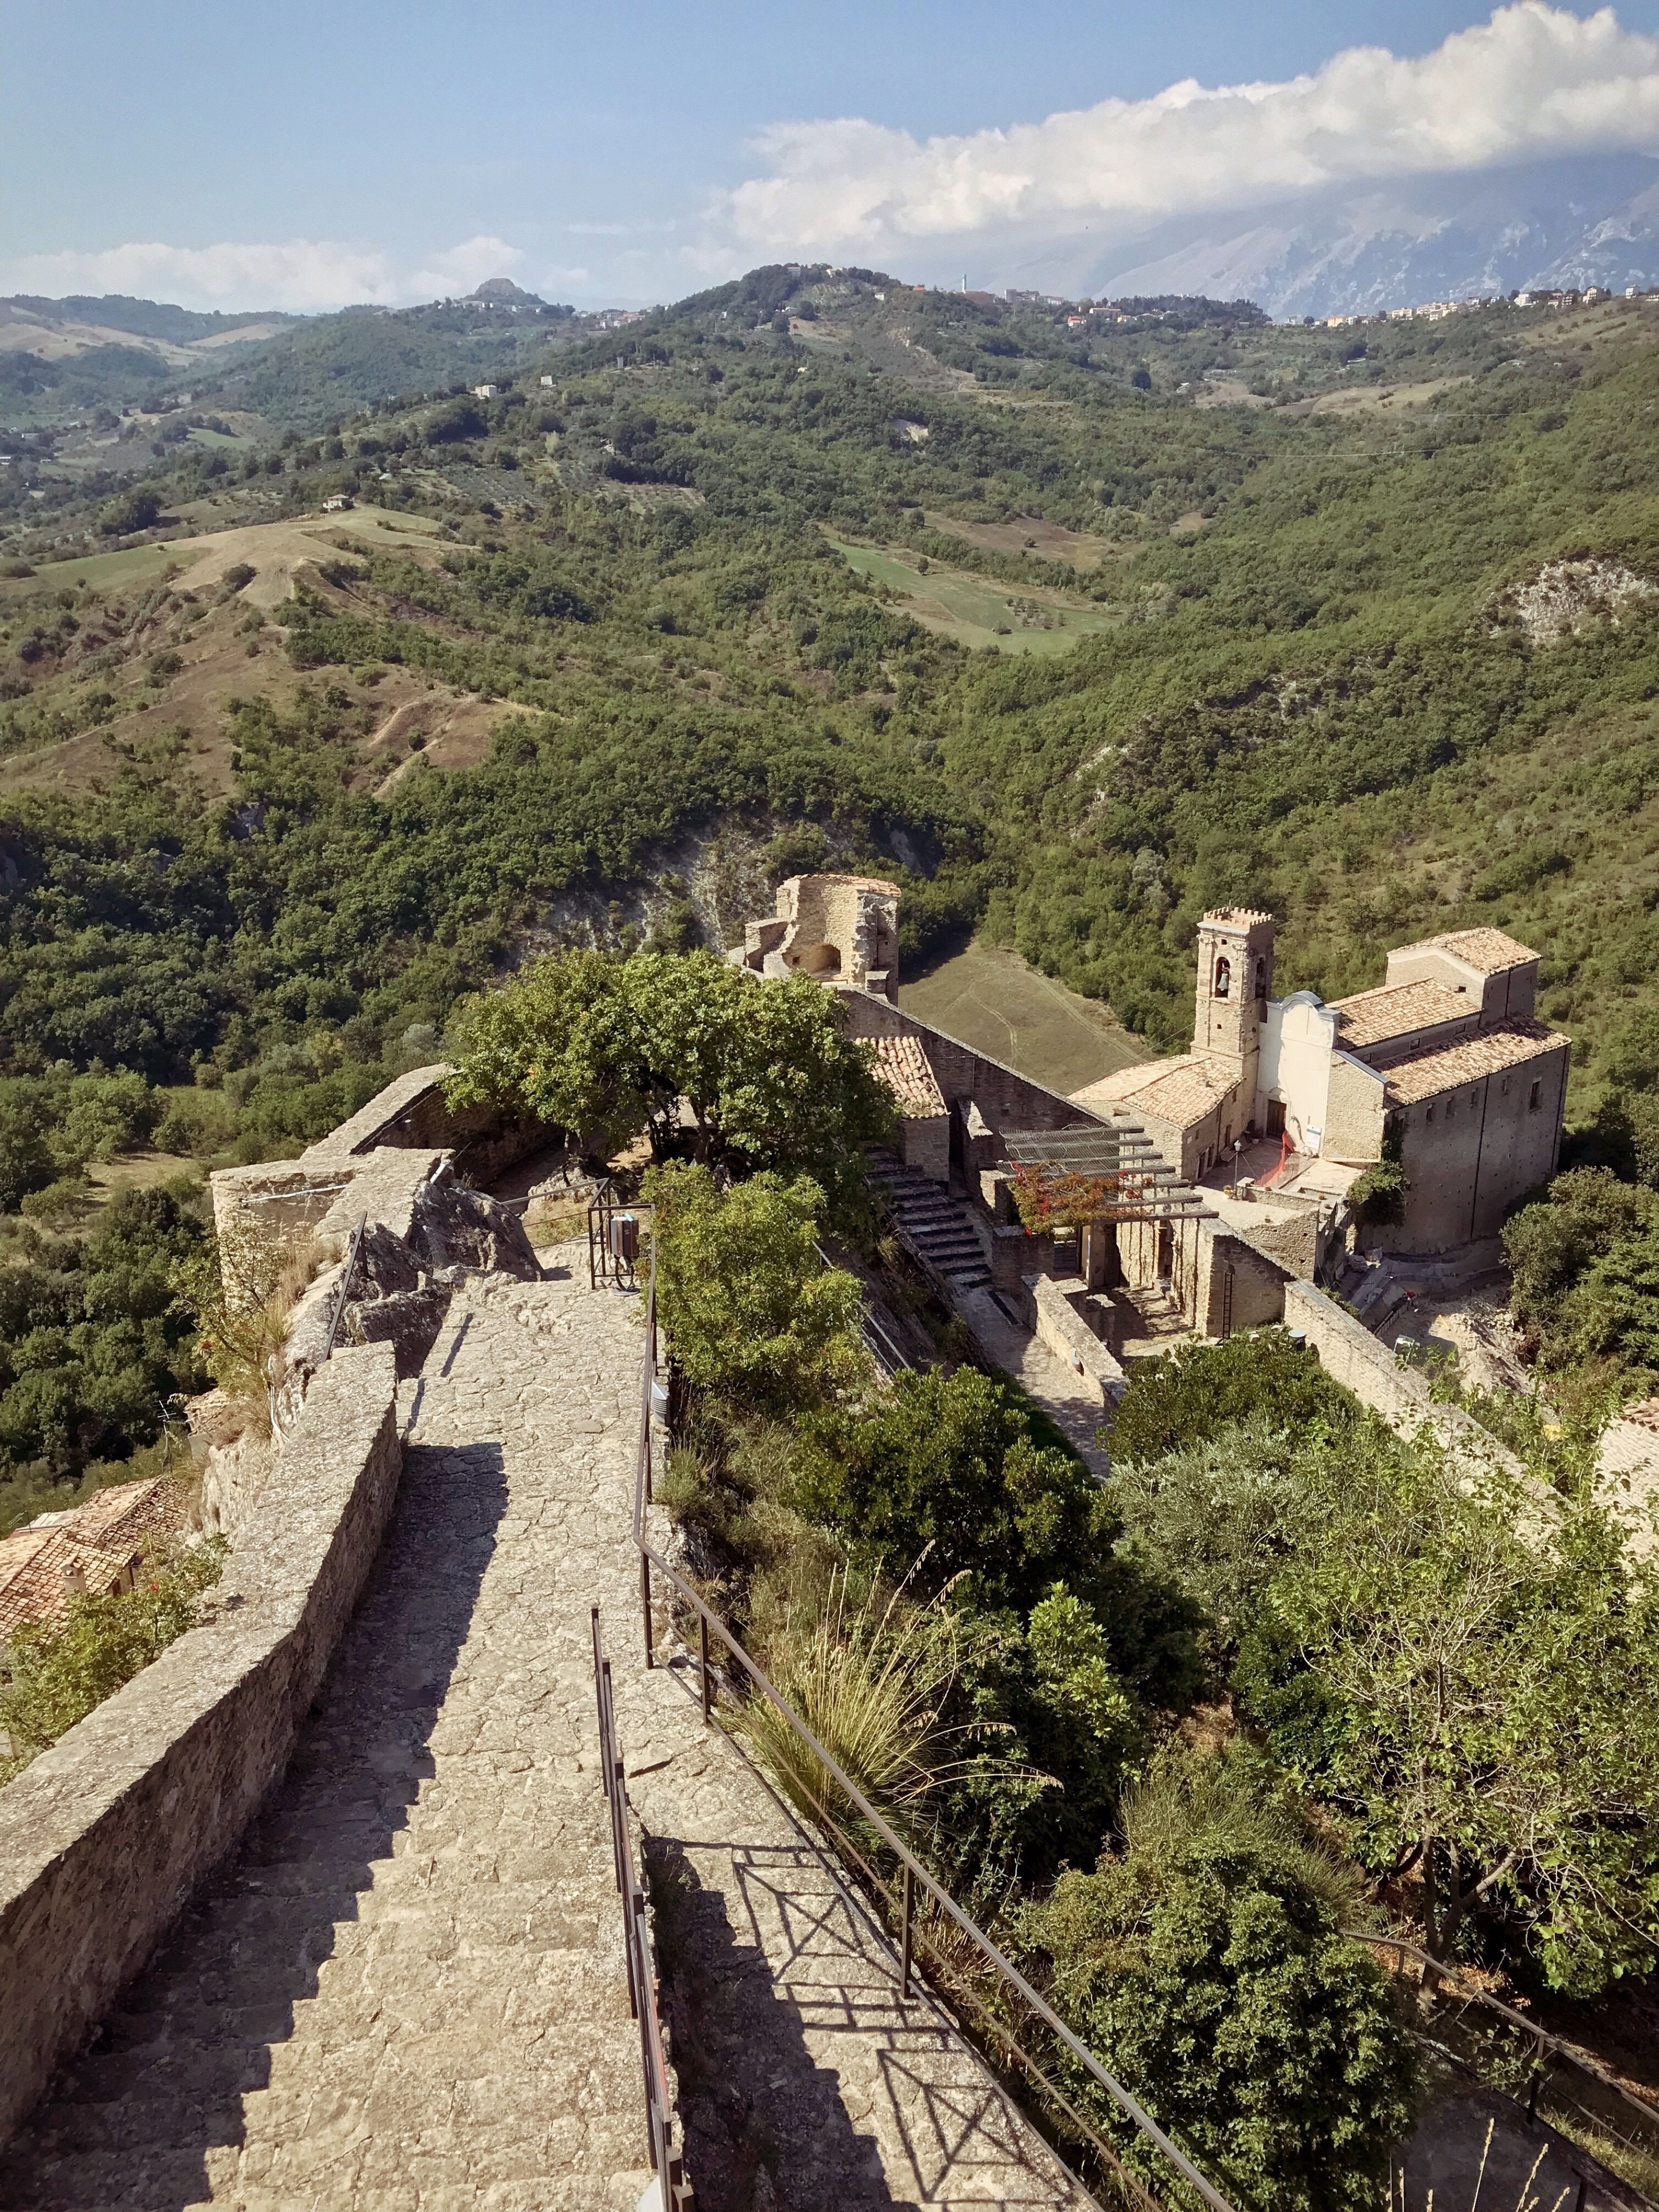 View from the top of the Castle of Roccascalegna.